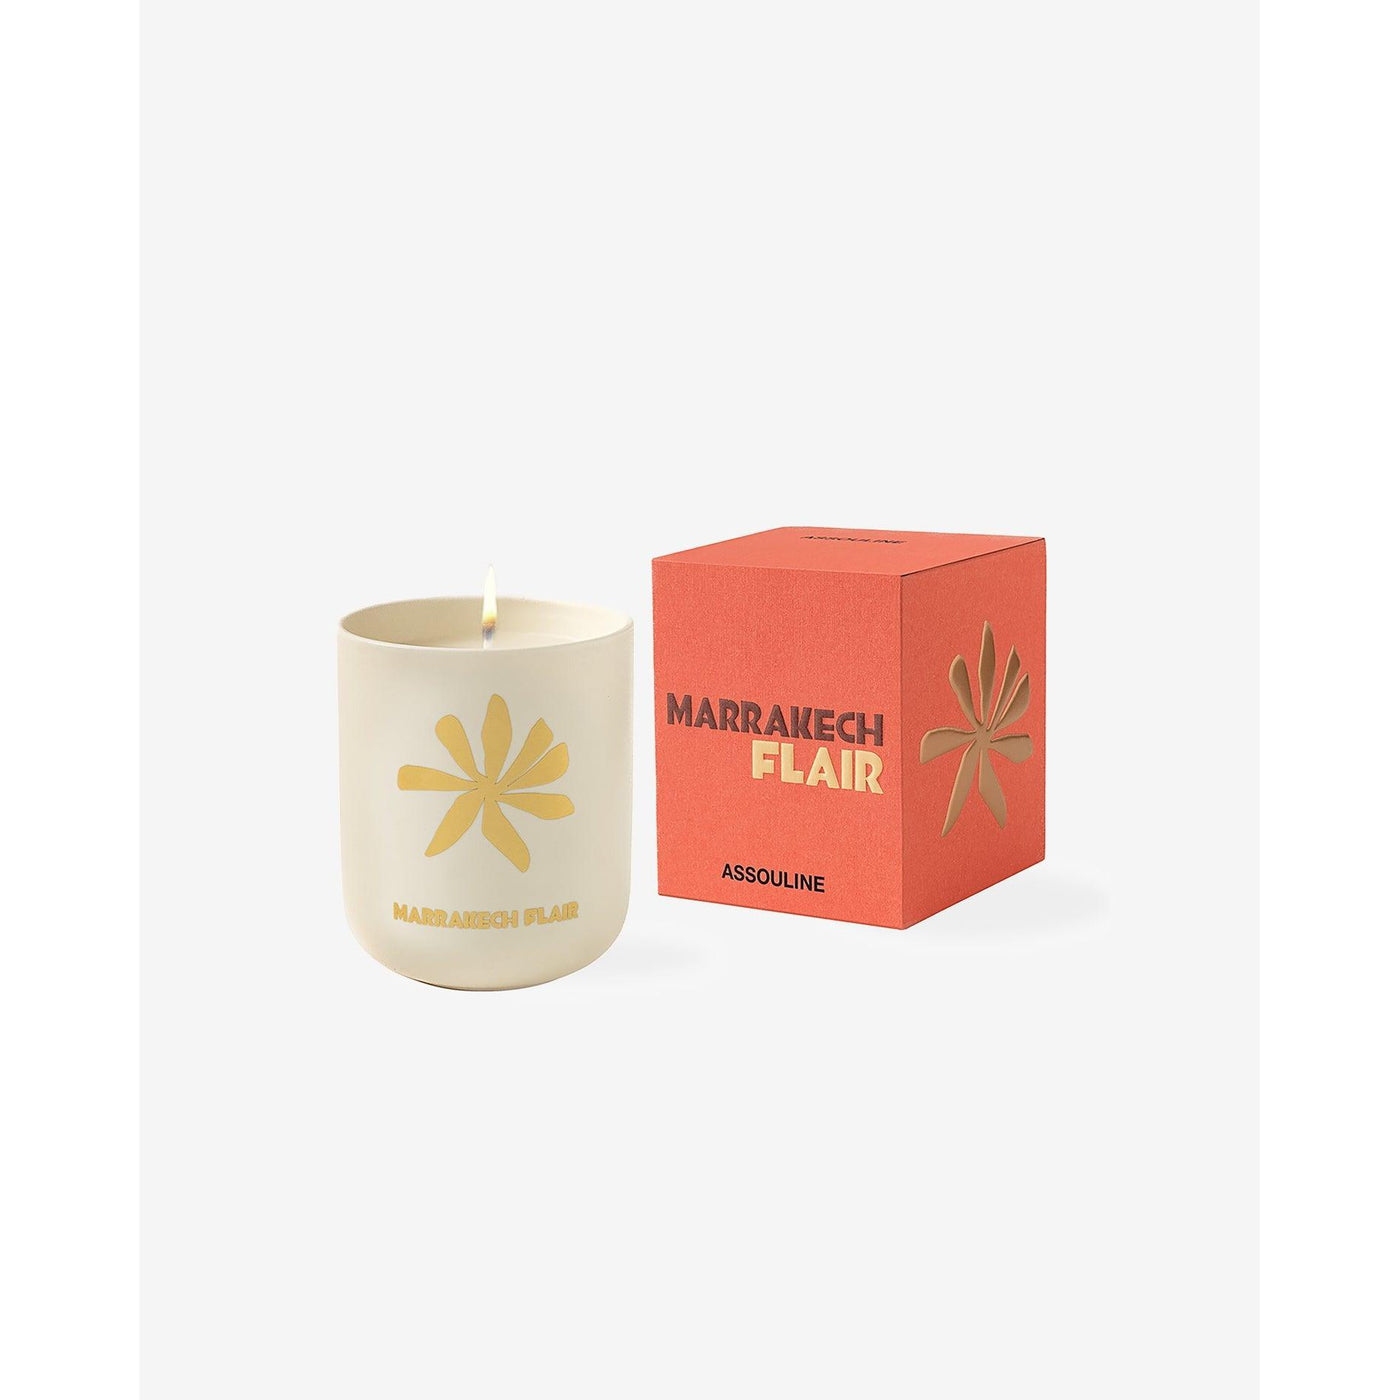 Travel From Home Candle: Marrakech Flair